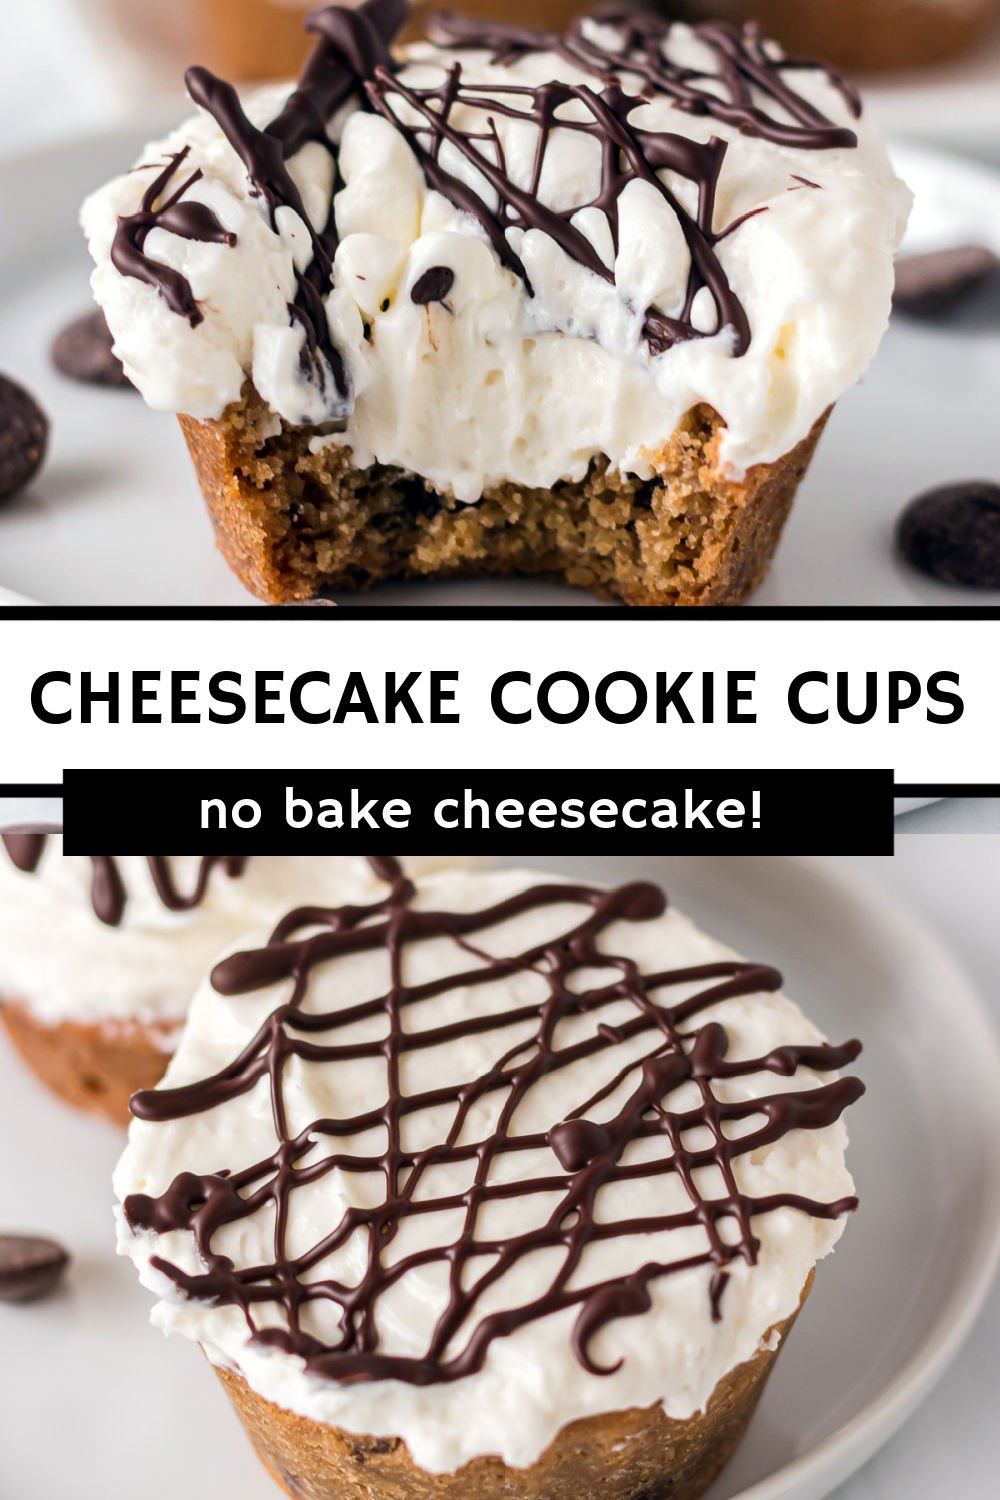 Cheesecake Cookie Cups start with a chocolate chip cookie base (pre-made or from scratch) and then are filled with an four ingredient, fluffy, no-bake cheesecake filling. Finish it all off with a chocolate drizzle and you have an easy and delicious mini dessert!
